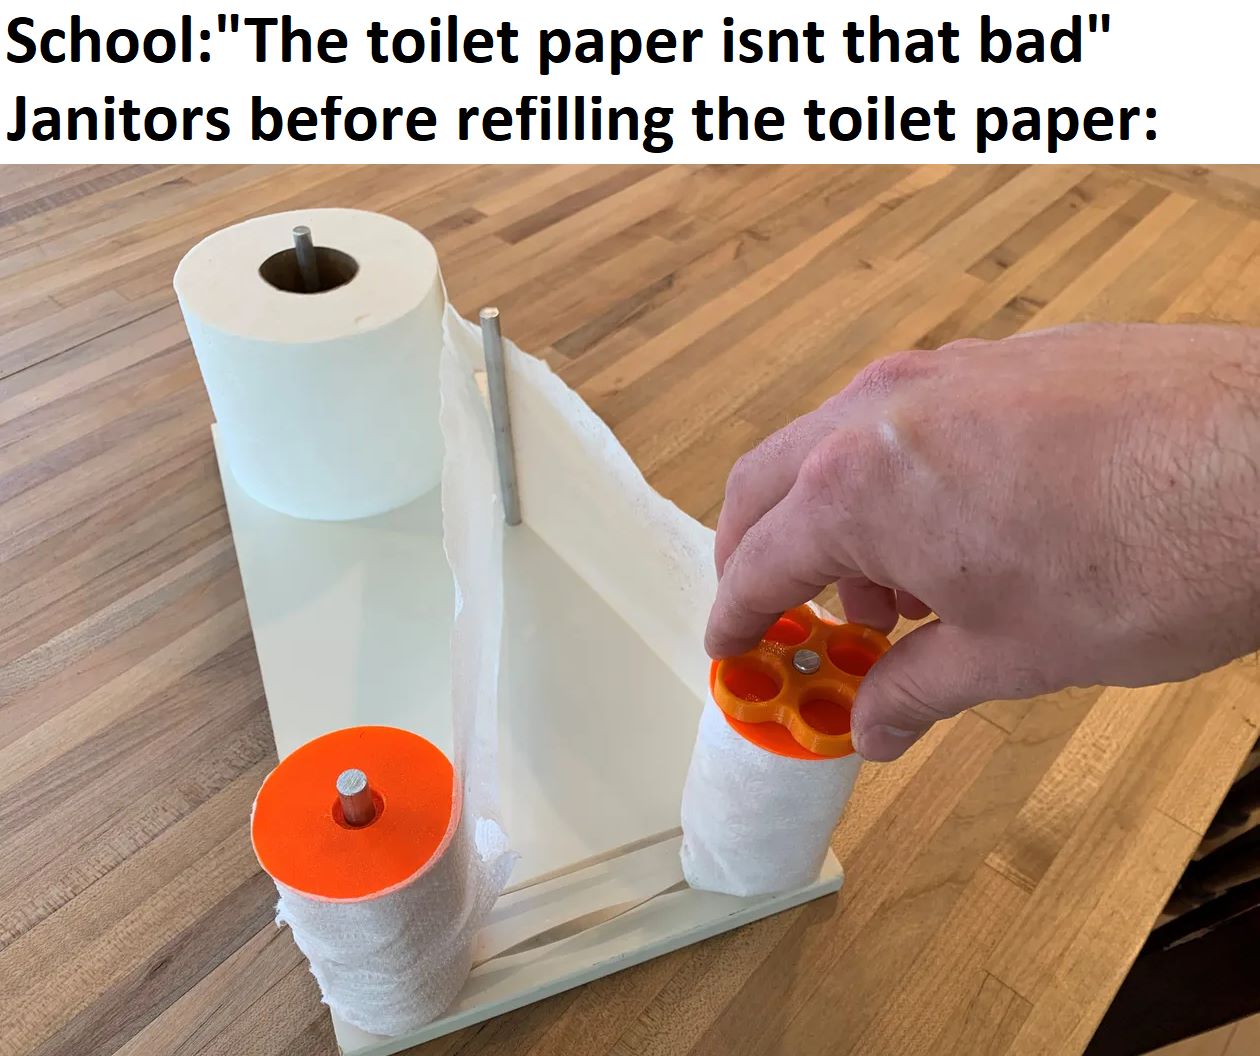 funny pics and memes - plastic - School"The toilet paper isnt that bad" Janitors before refilling the toilet paper